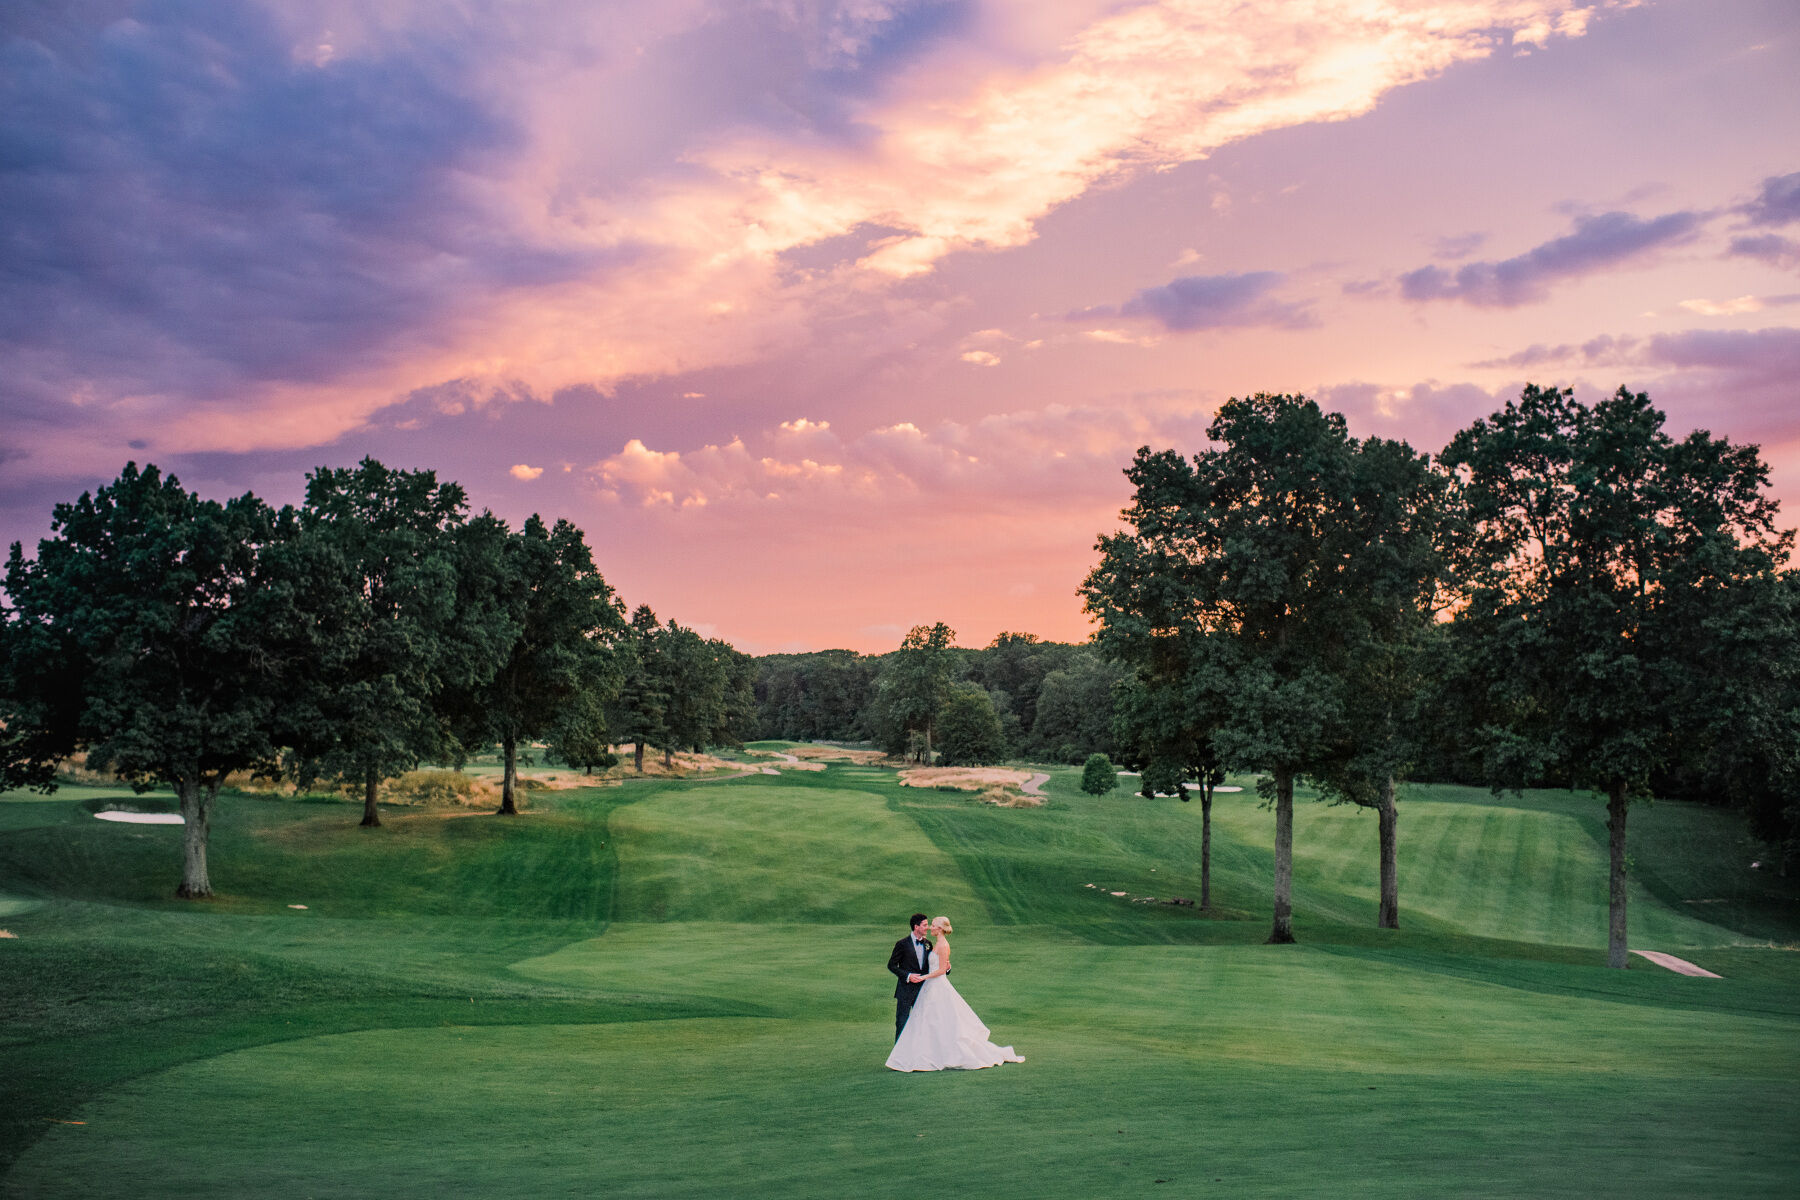 Golf Course Wedding Venues: A wedding couple staring at each other on a golf course with a dramatic sunset in the background.